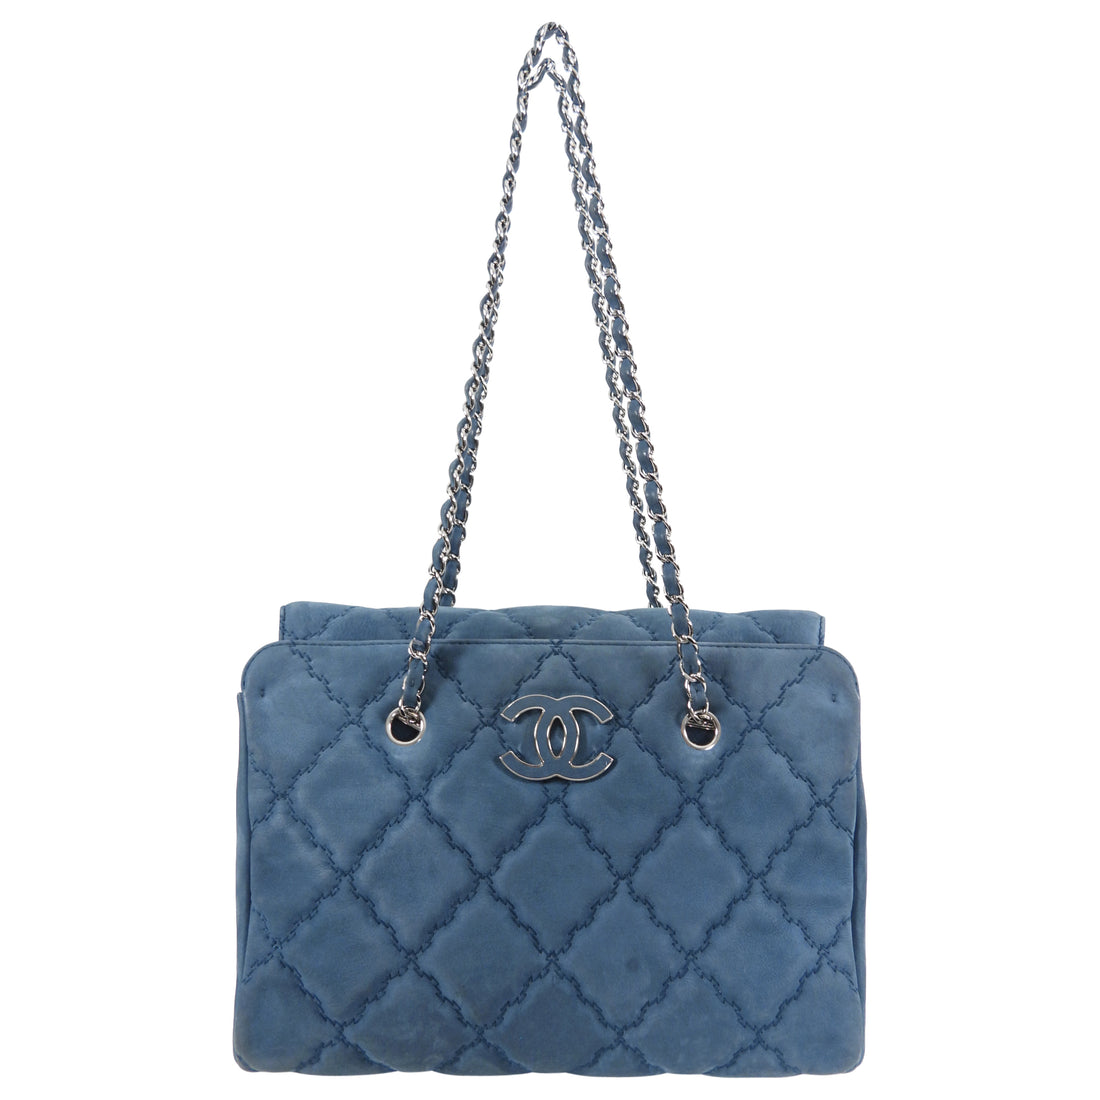 Chanel Teal Blue Suede Quilted CC Logo Chain Shoulder Bag